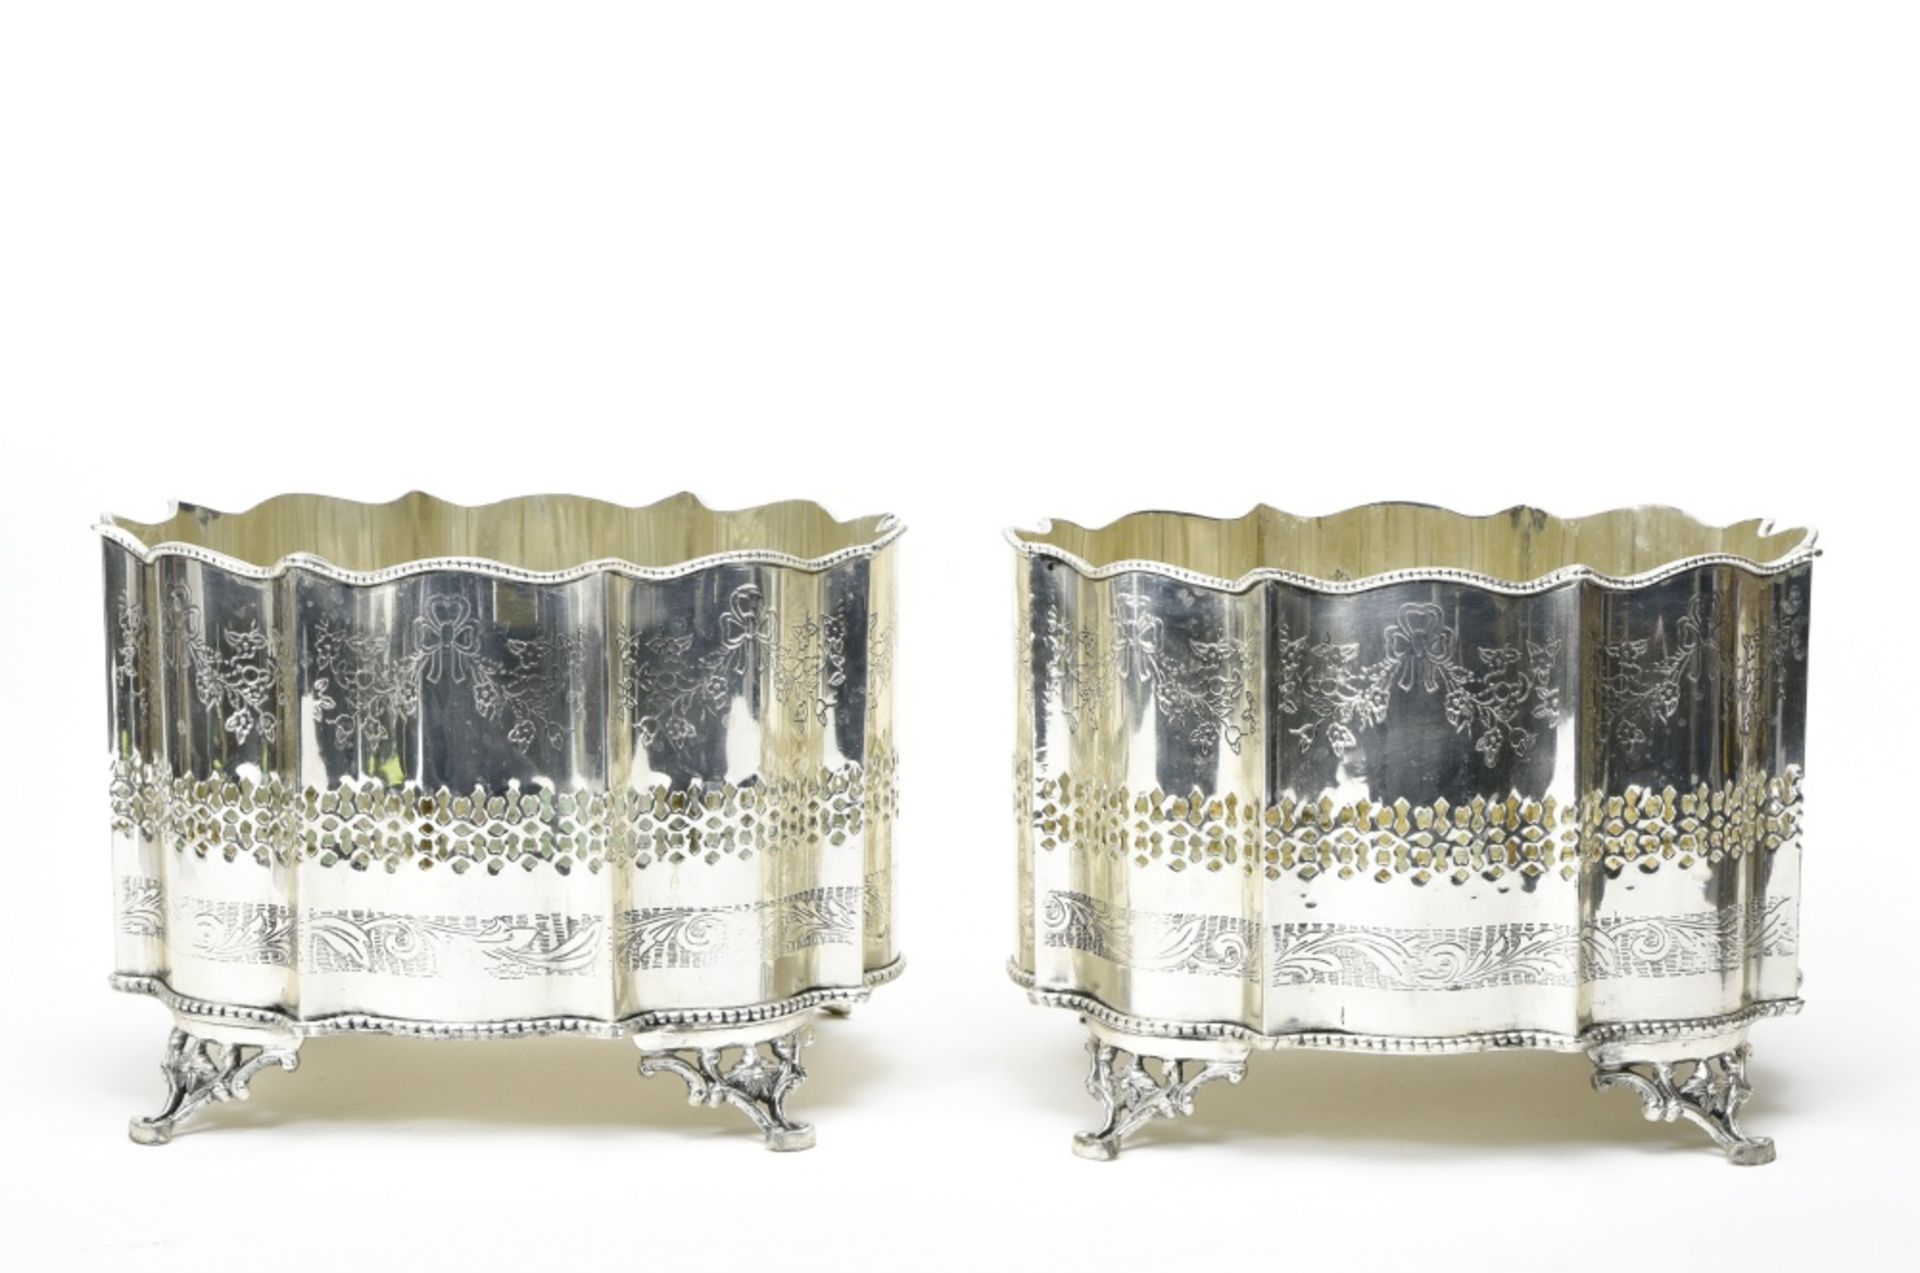 English work Pair of planters, Silvery metal with floral dŽcor. Height (cm) : 19 - Width (cm) :